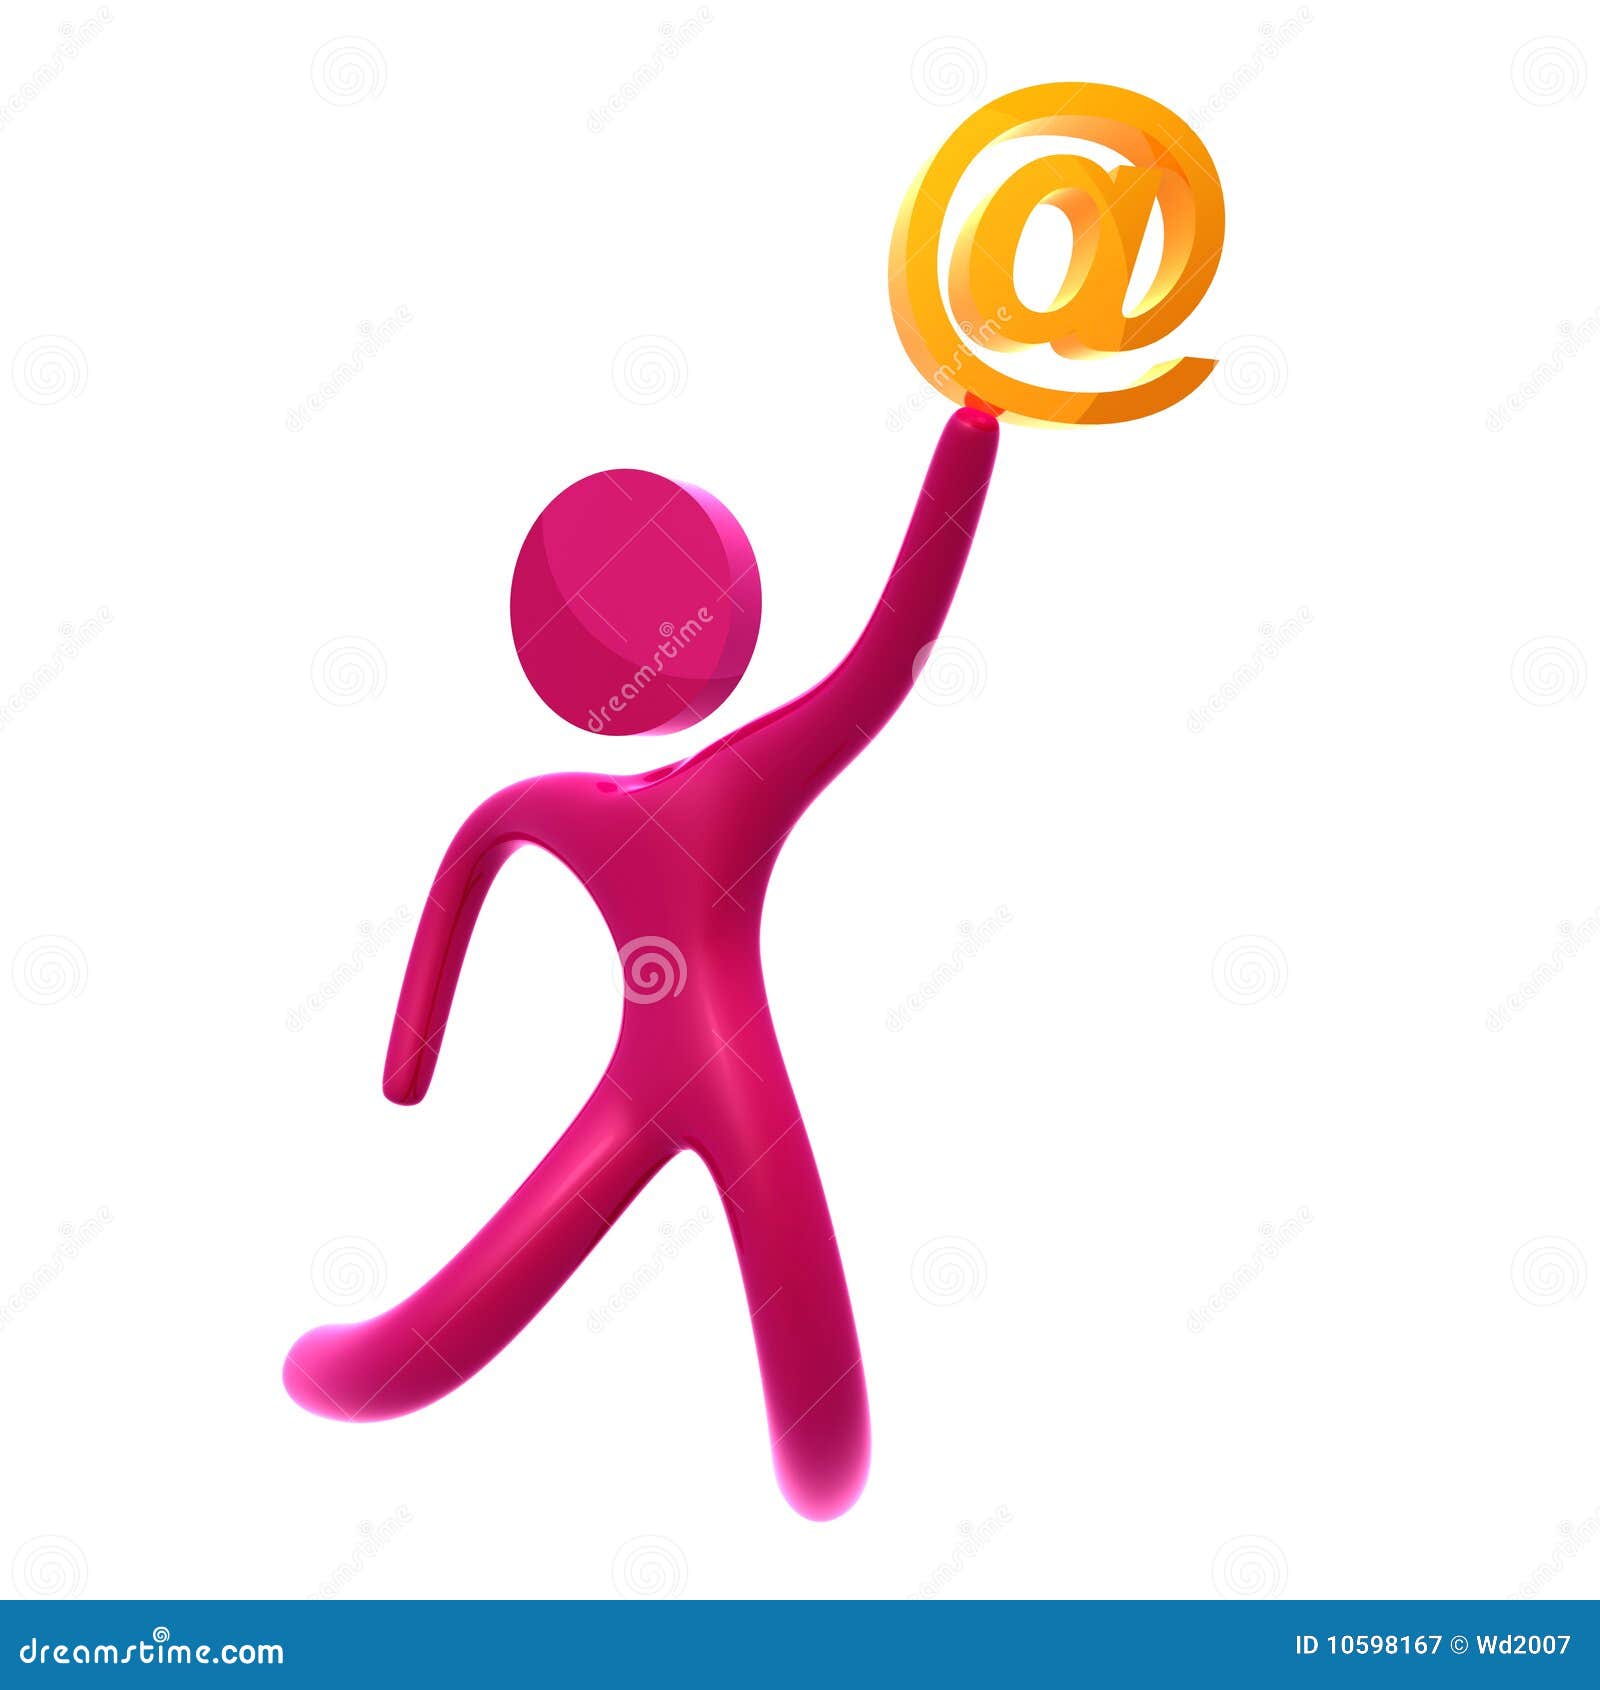 email send and receive 3d icon